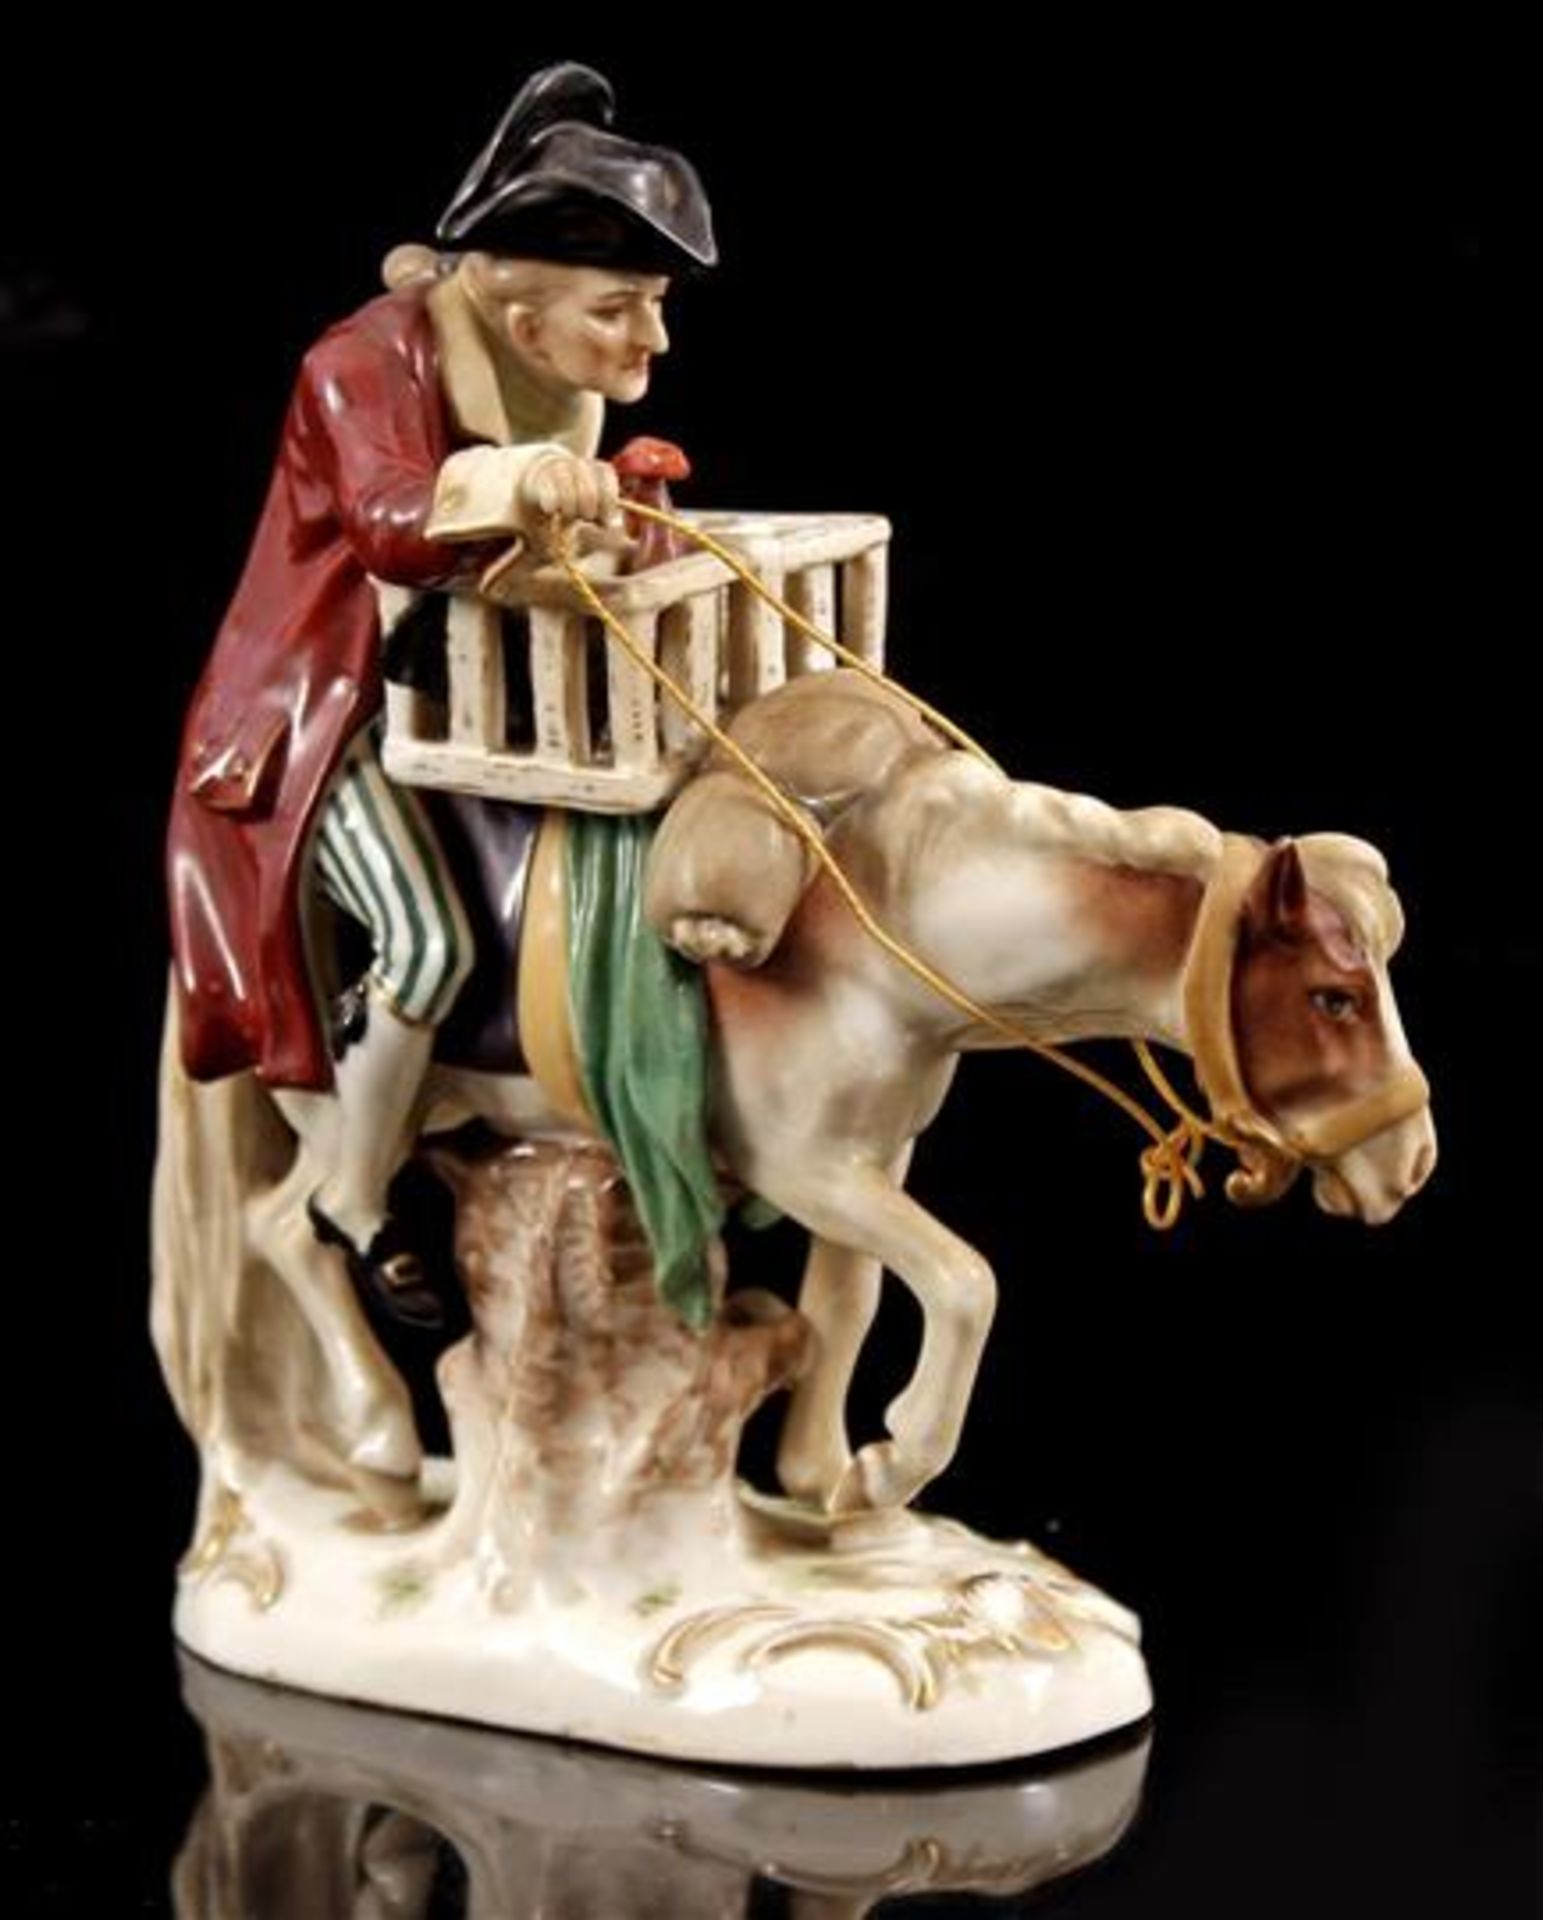 Porcelain group of statues of man on horse, cage with cock, marked bottom with mark Scheibe